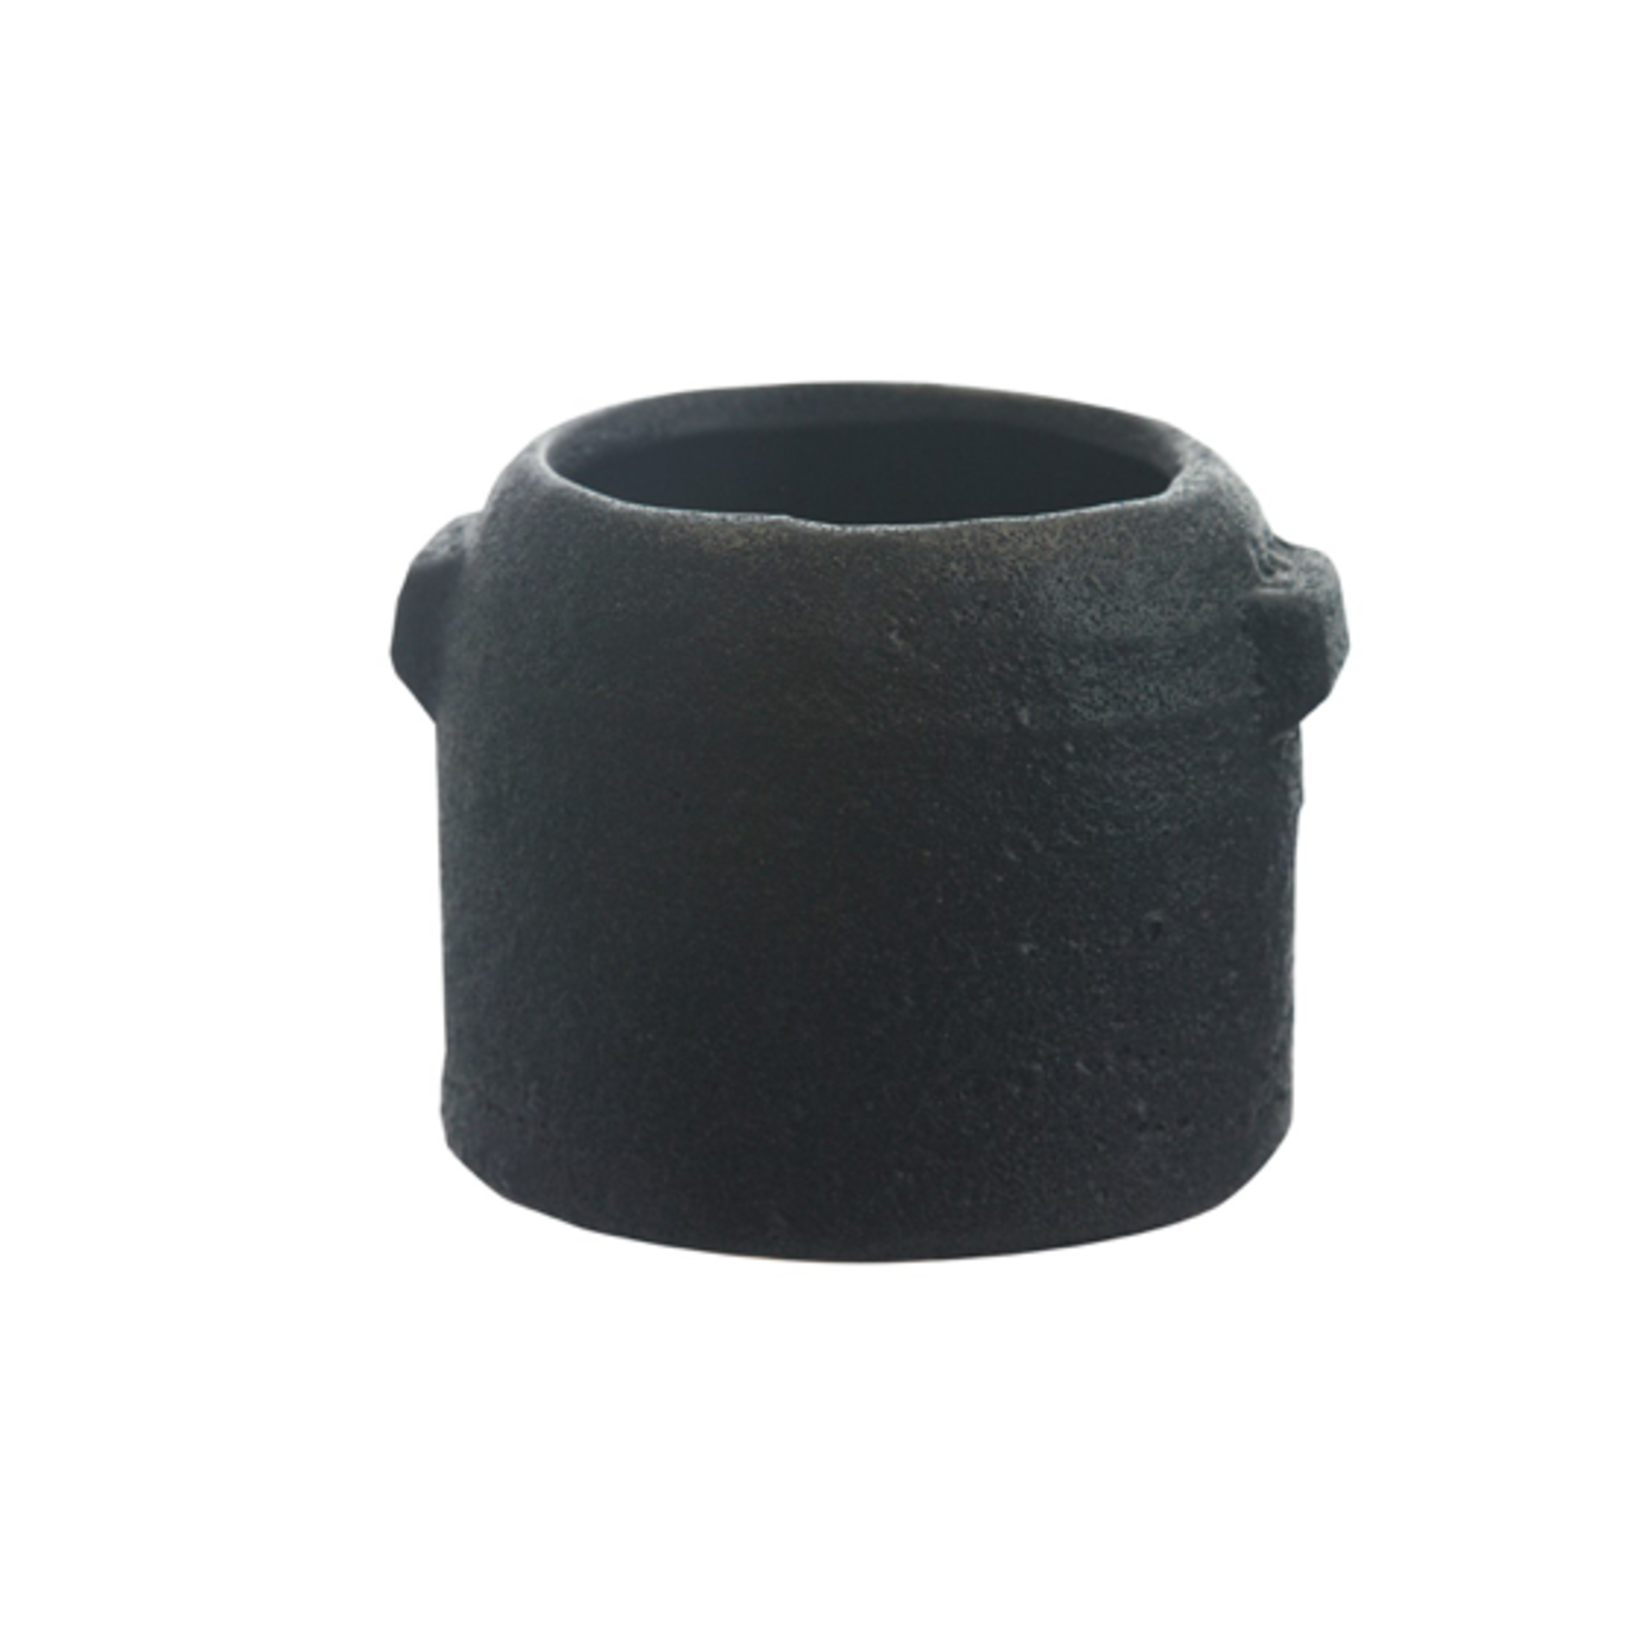 2.75”H X 4” BLACK ZINTO LOW AND WIDE CERAMIC PLANTER WITH SMALL HANDLE